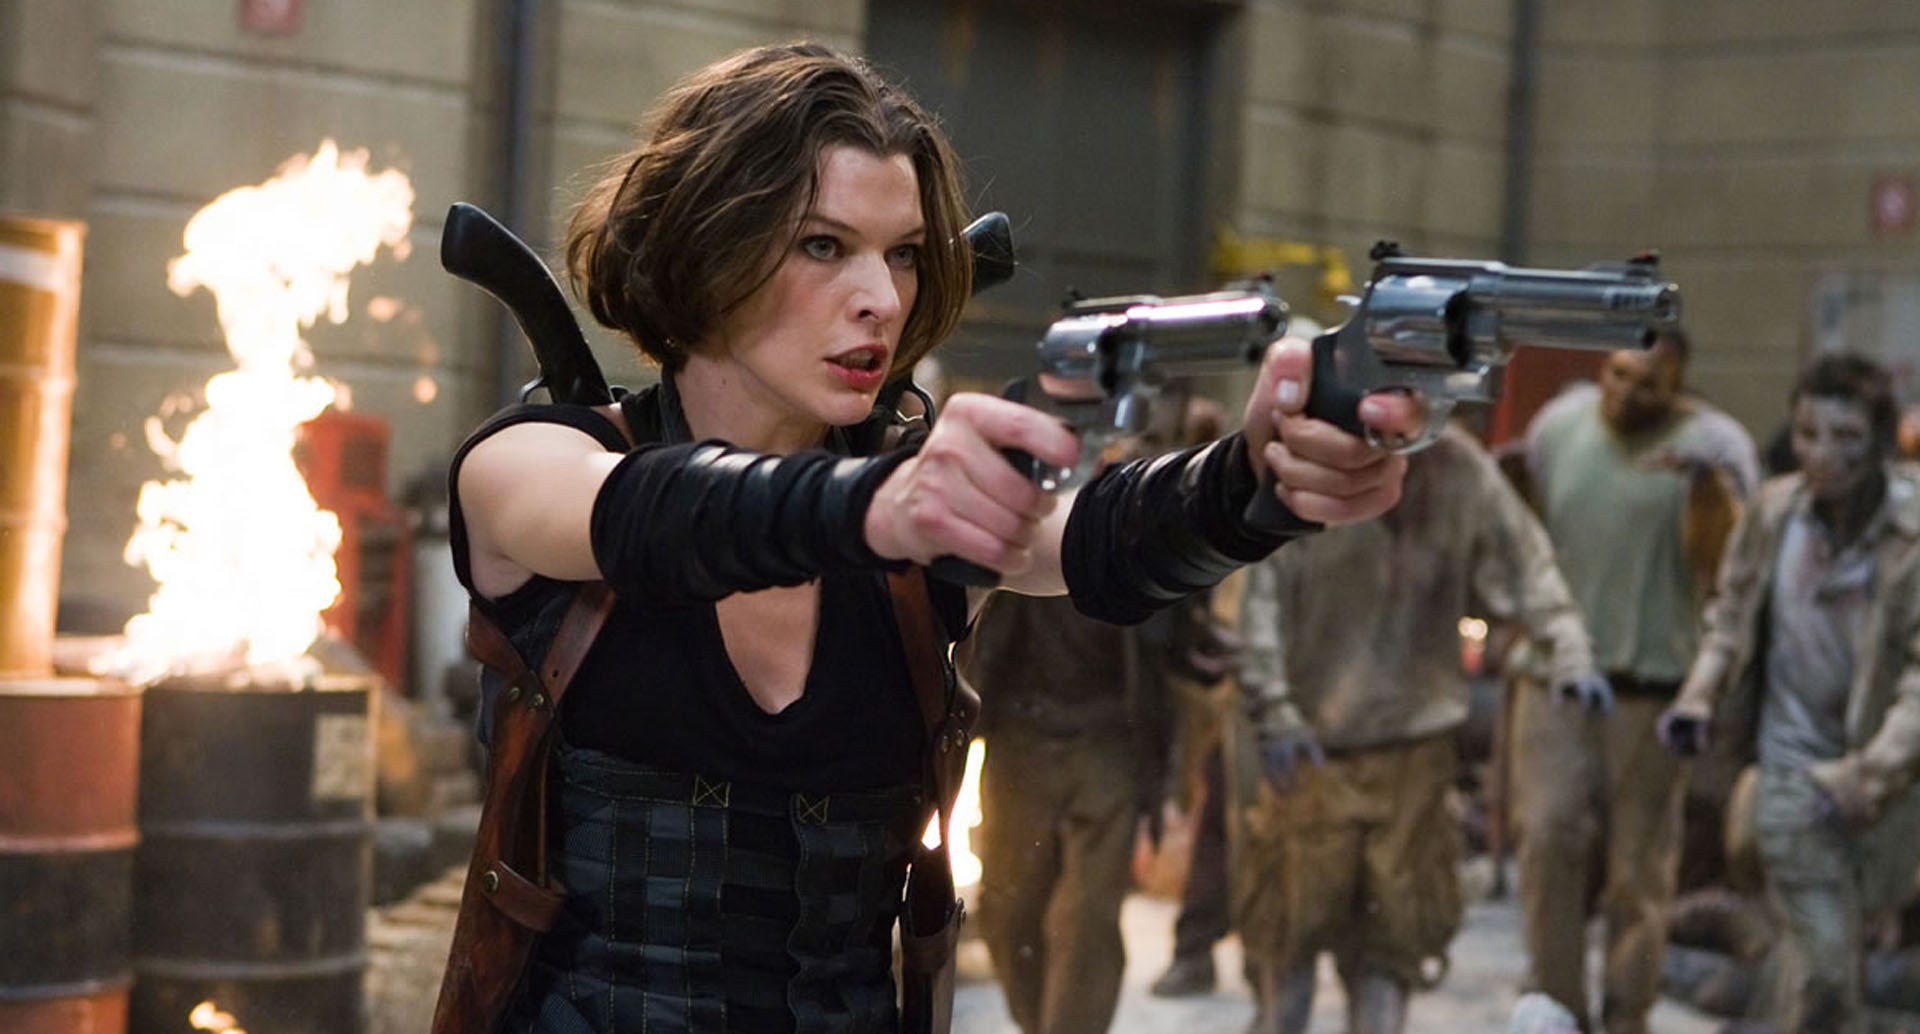 Netflix reportedly developing a Resident Evil television series - The Verge